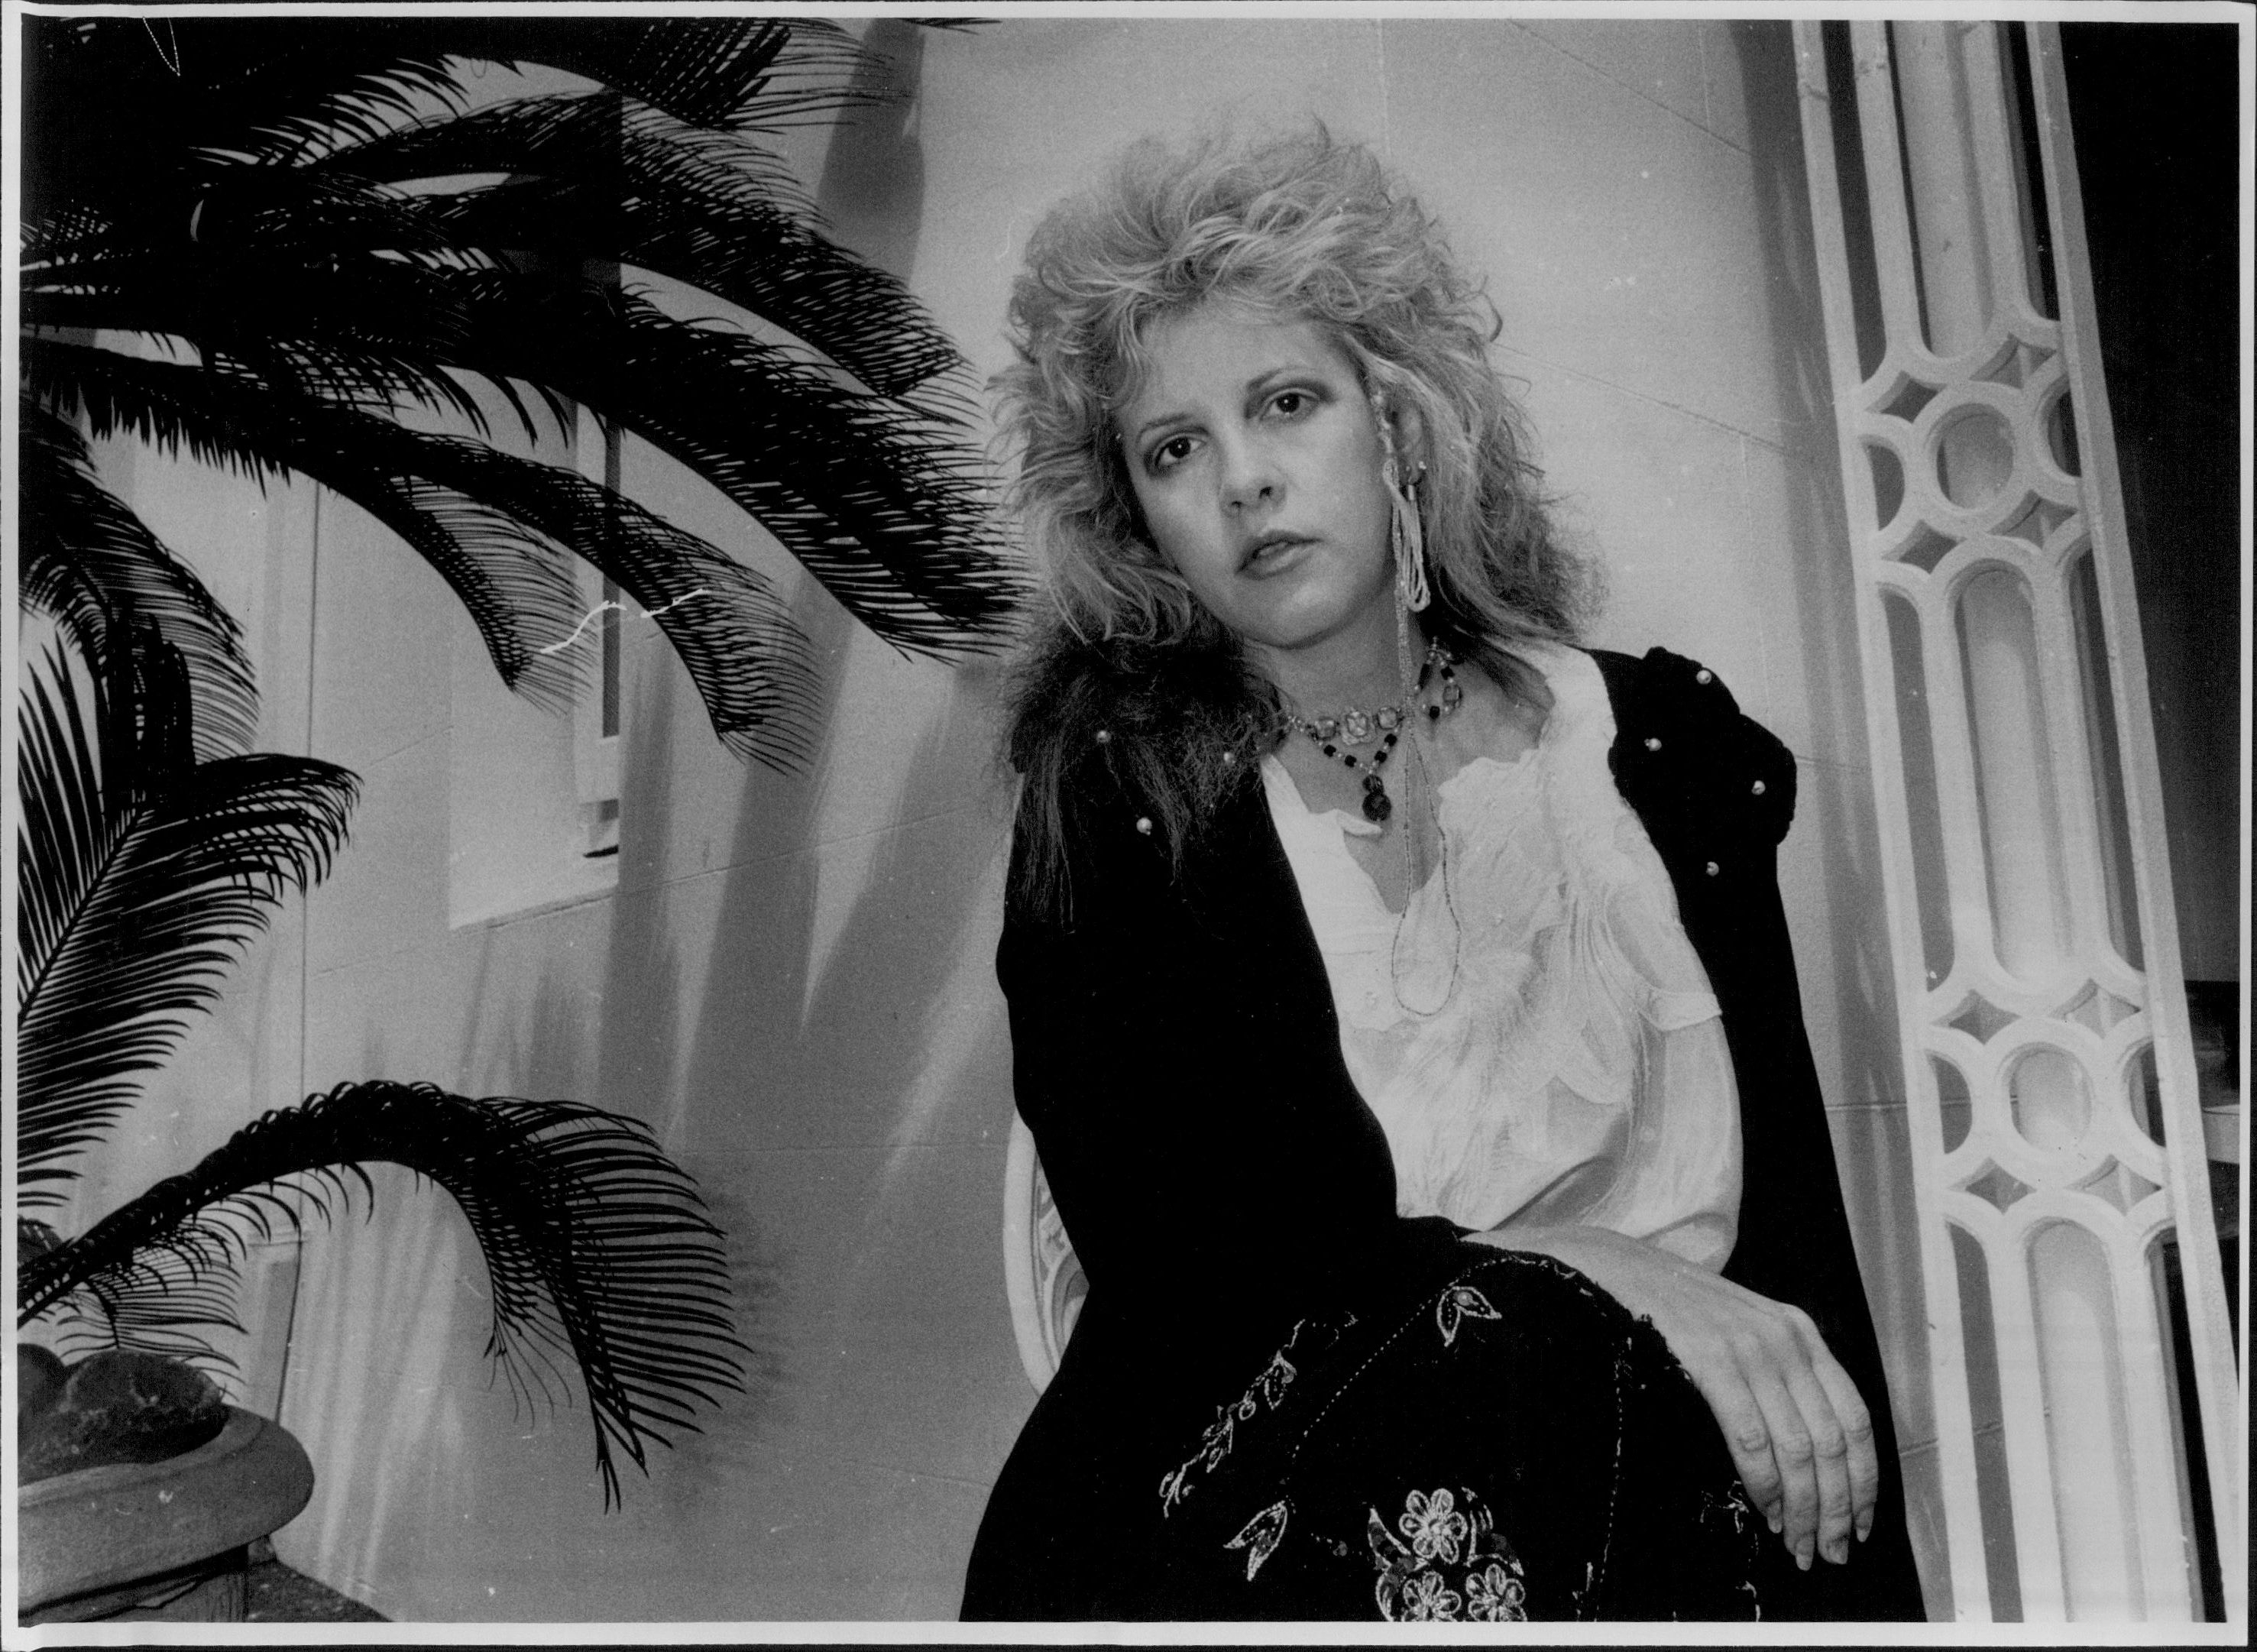 Stevie Nicks of Fleetwood Mac near a plant around the time she wrote "Beauty and the Beast"